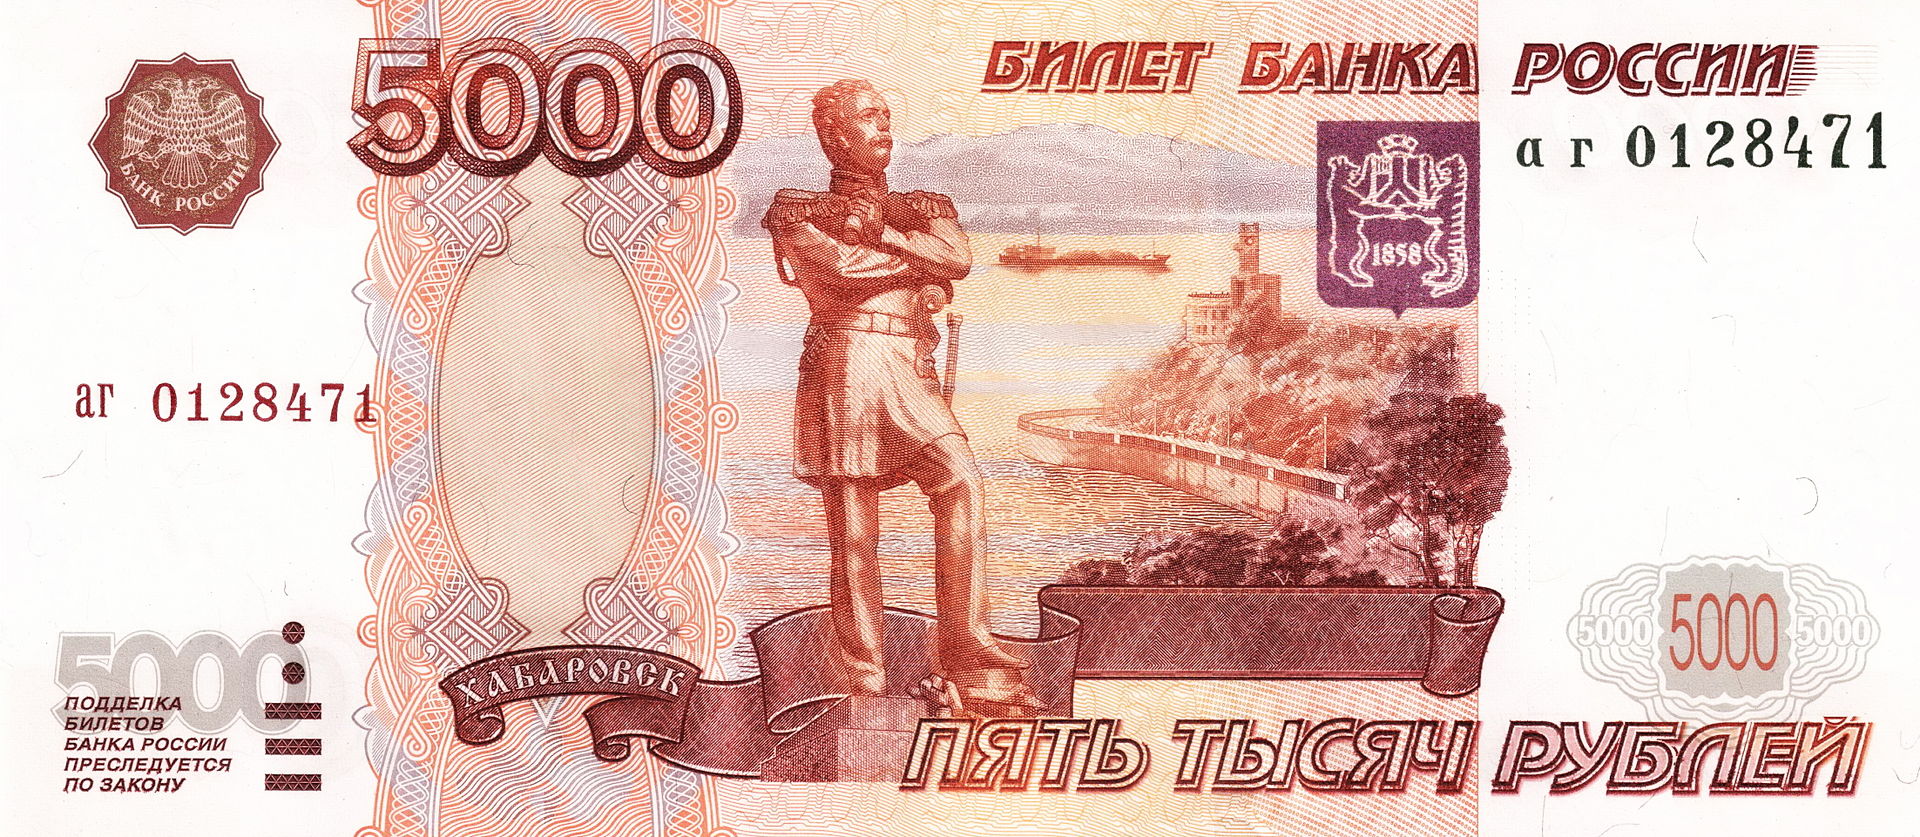 1920px-Banknote_5000_rubles_%281997%29_front.jpg